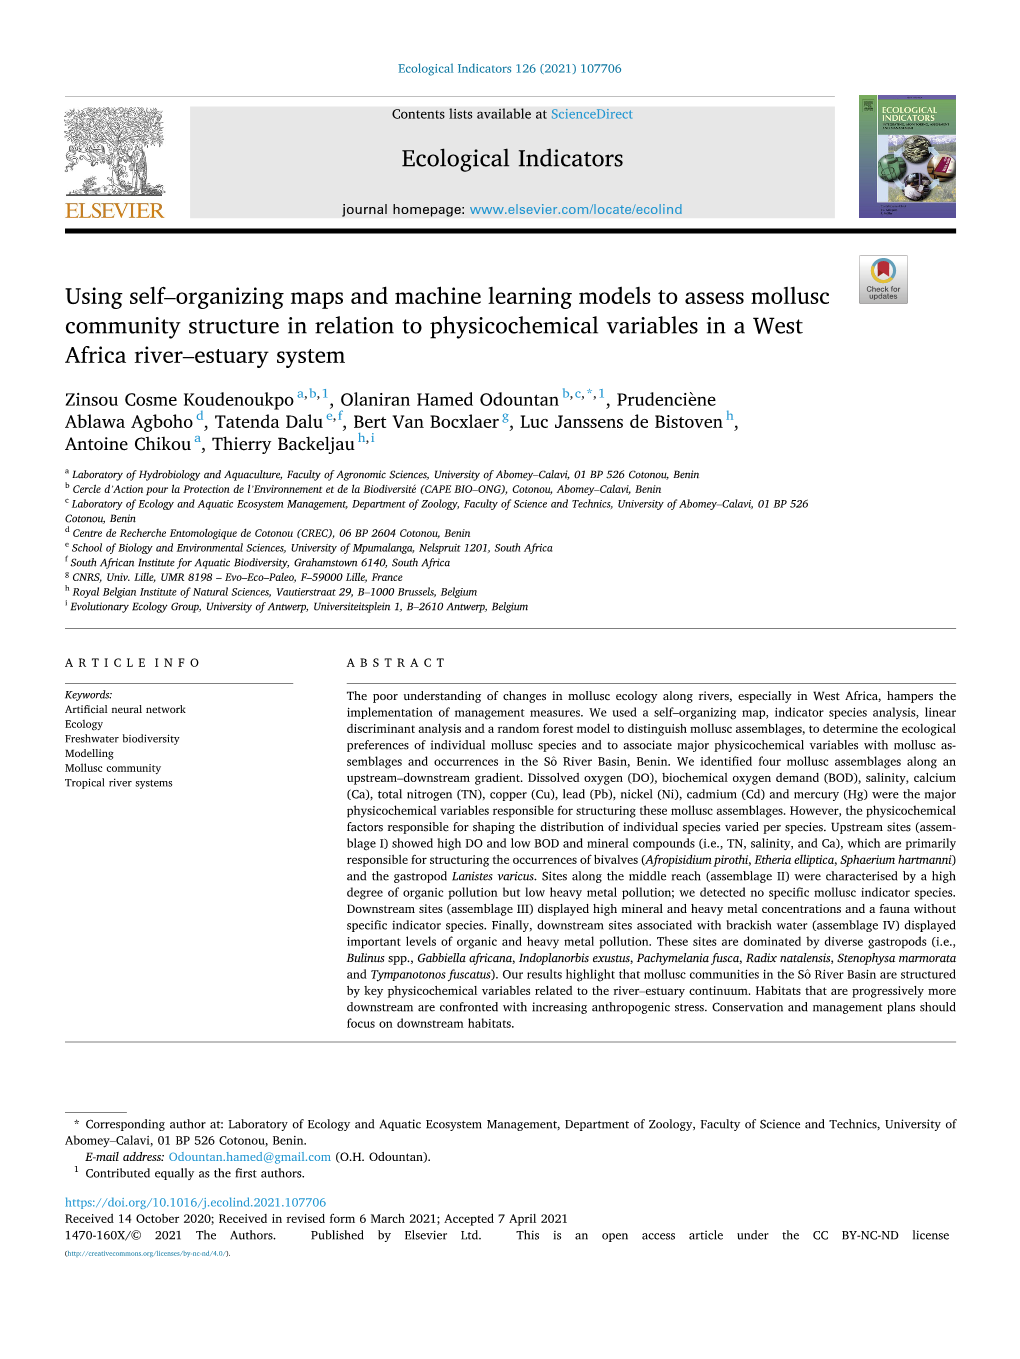 Organizing Maps and Machine Learning Models to Assess Mollusc Community Structure in Relation to Physicochemical Variables in a West Africa River–Estuary System